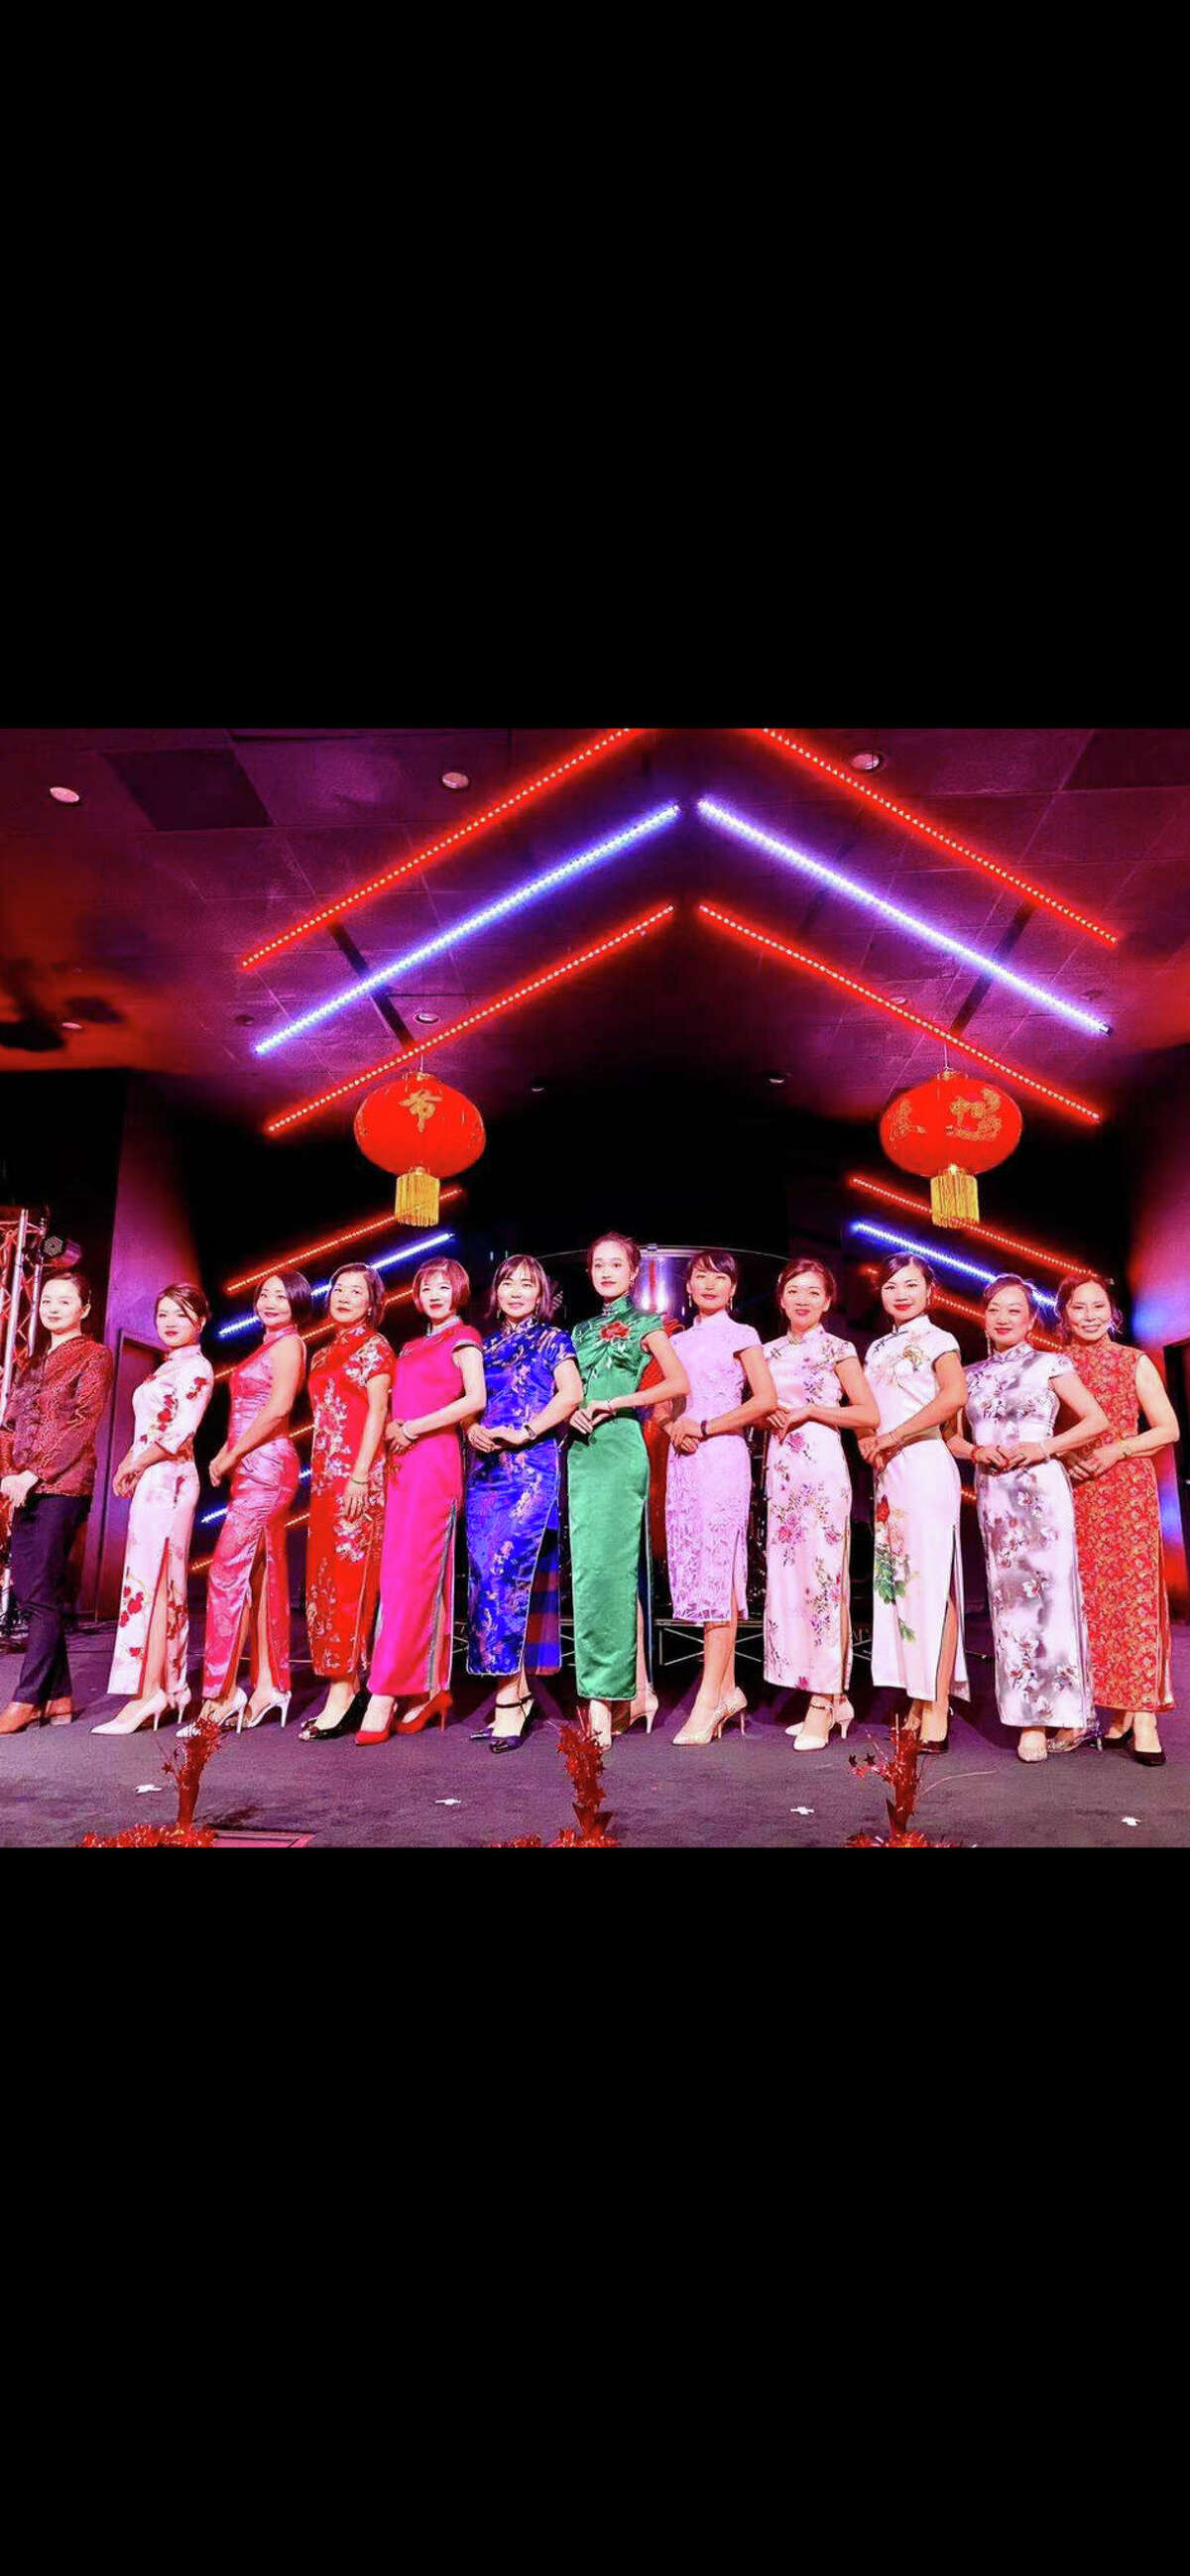 The Permian Basin Chinese Association will have its new year gala this Saturday. 